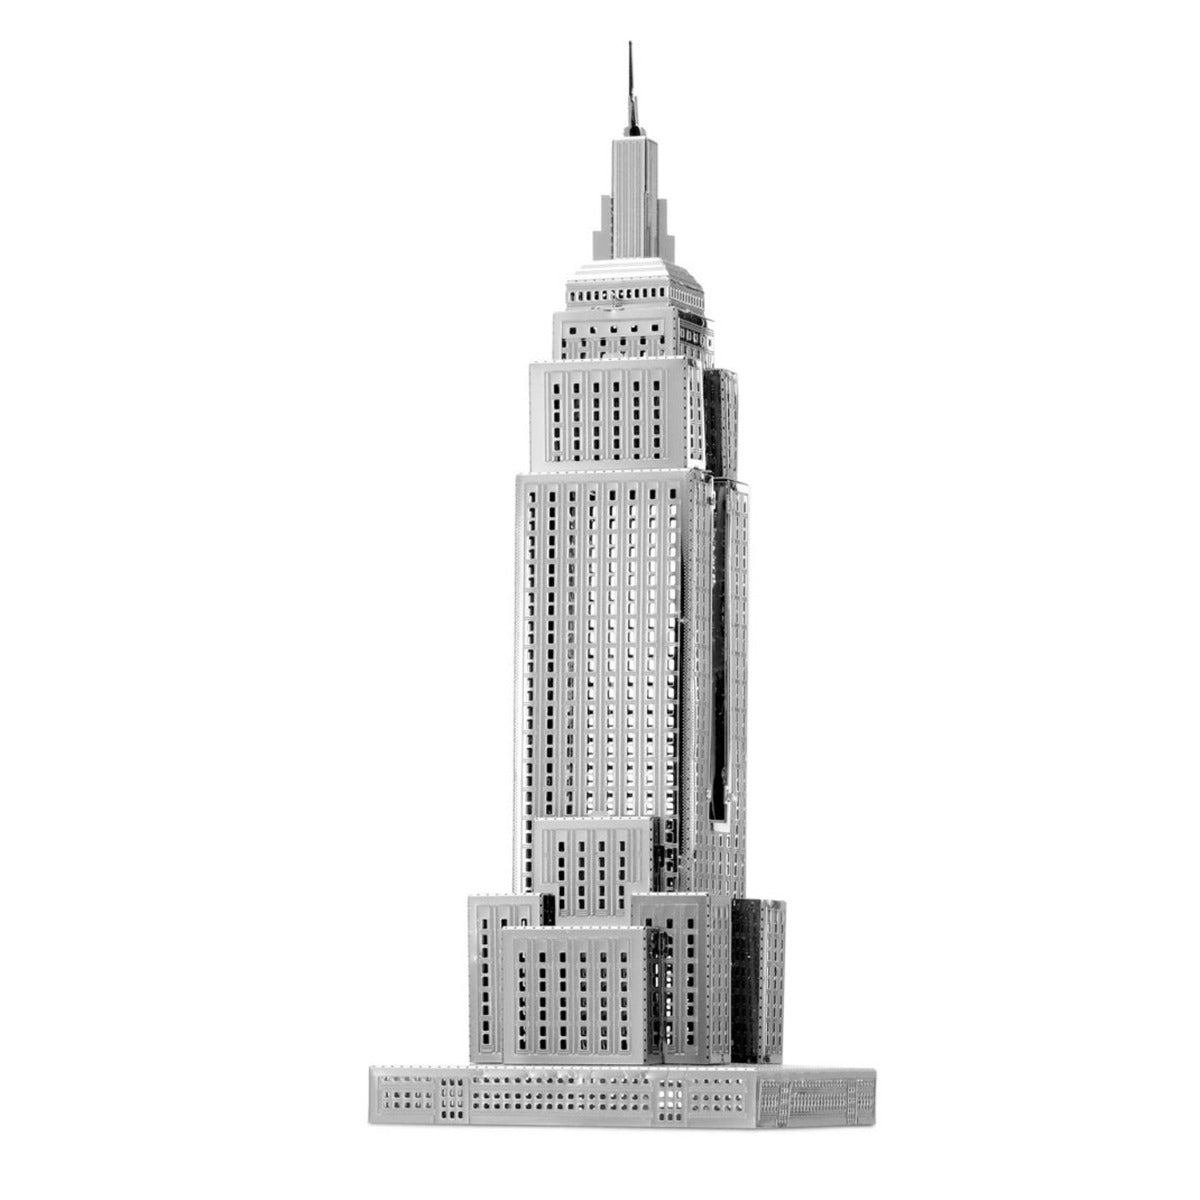 Metal Earth Metallbausätze ICX010 ICONX Empire State Building Wolkenkratzer Metall Modell